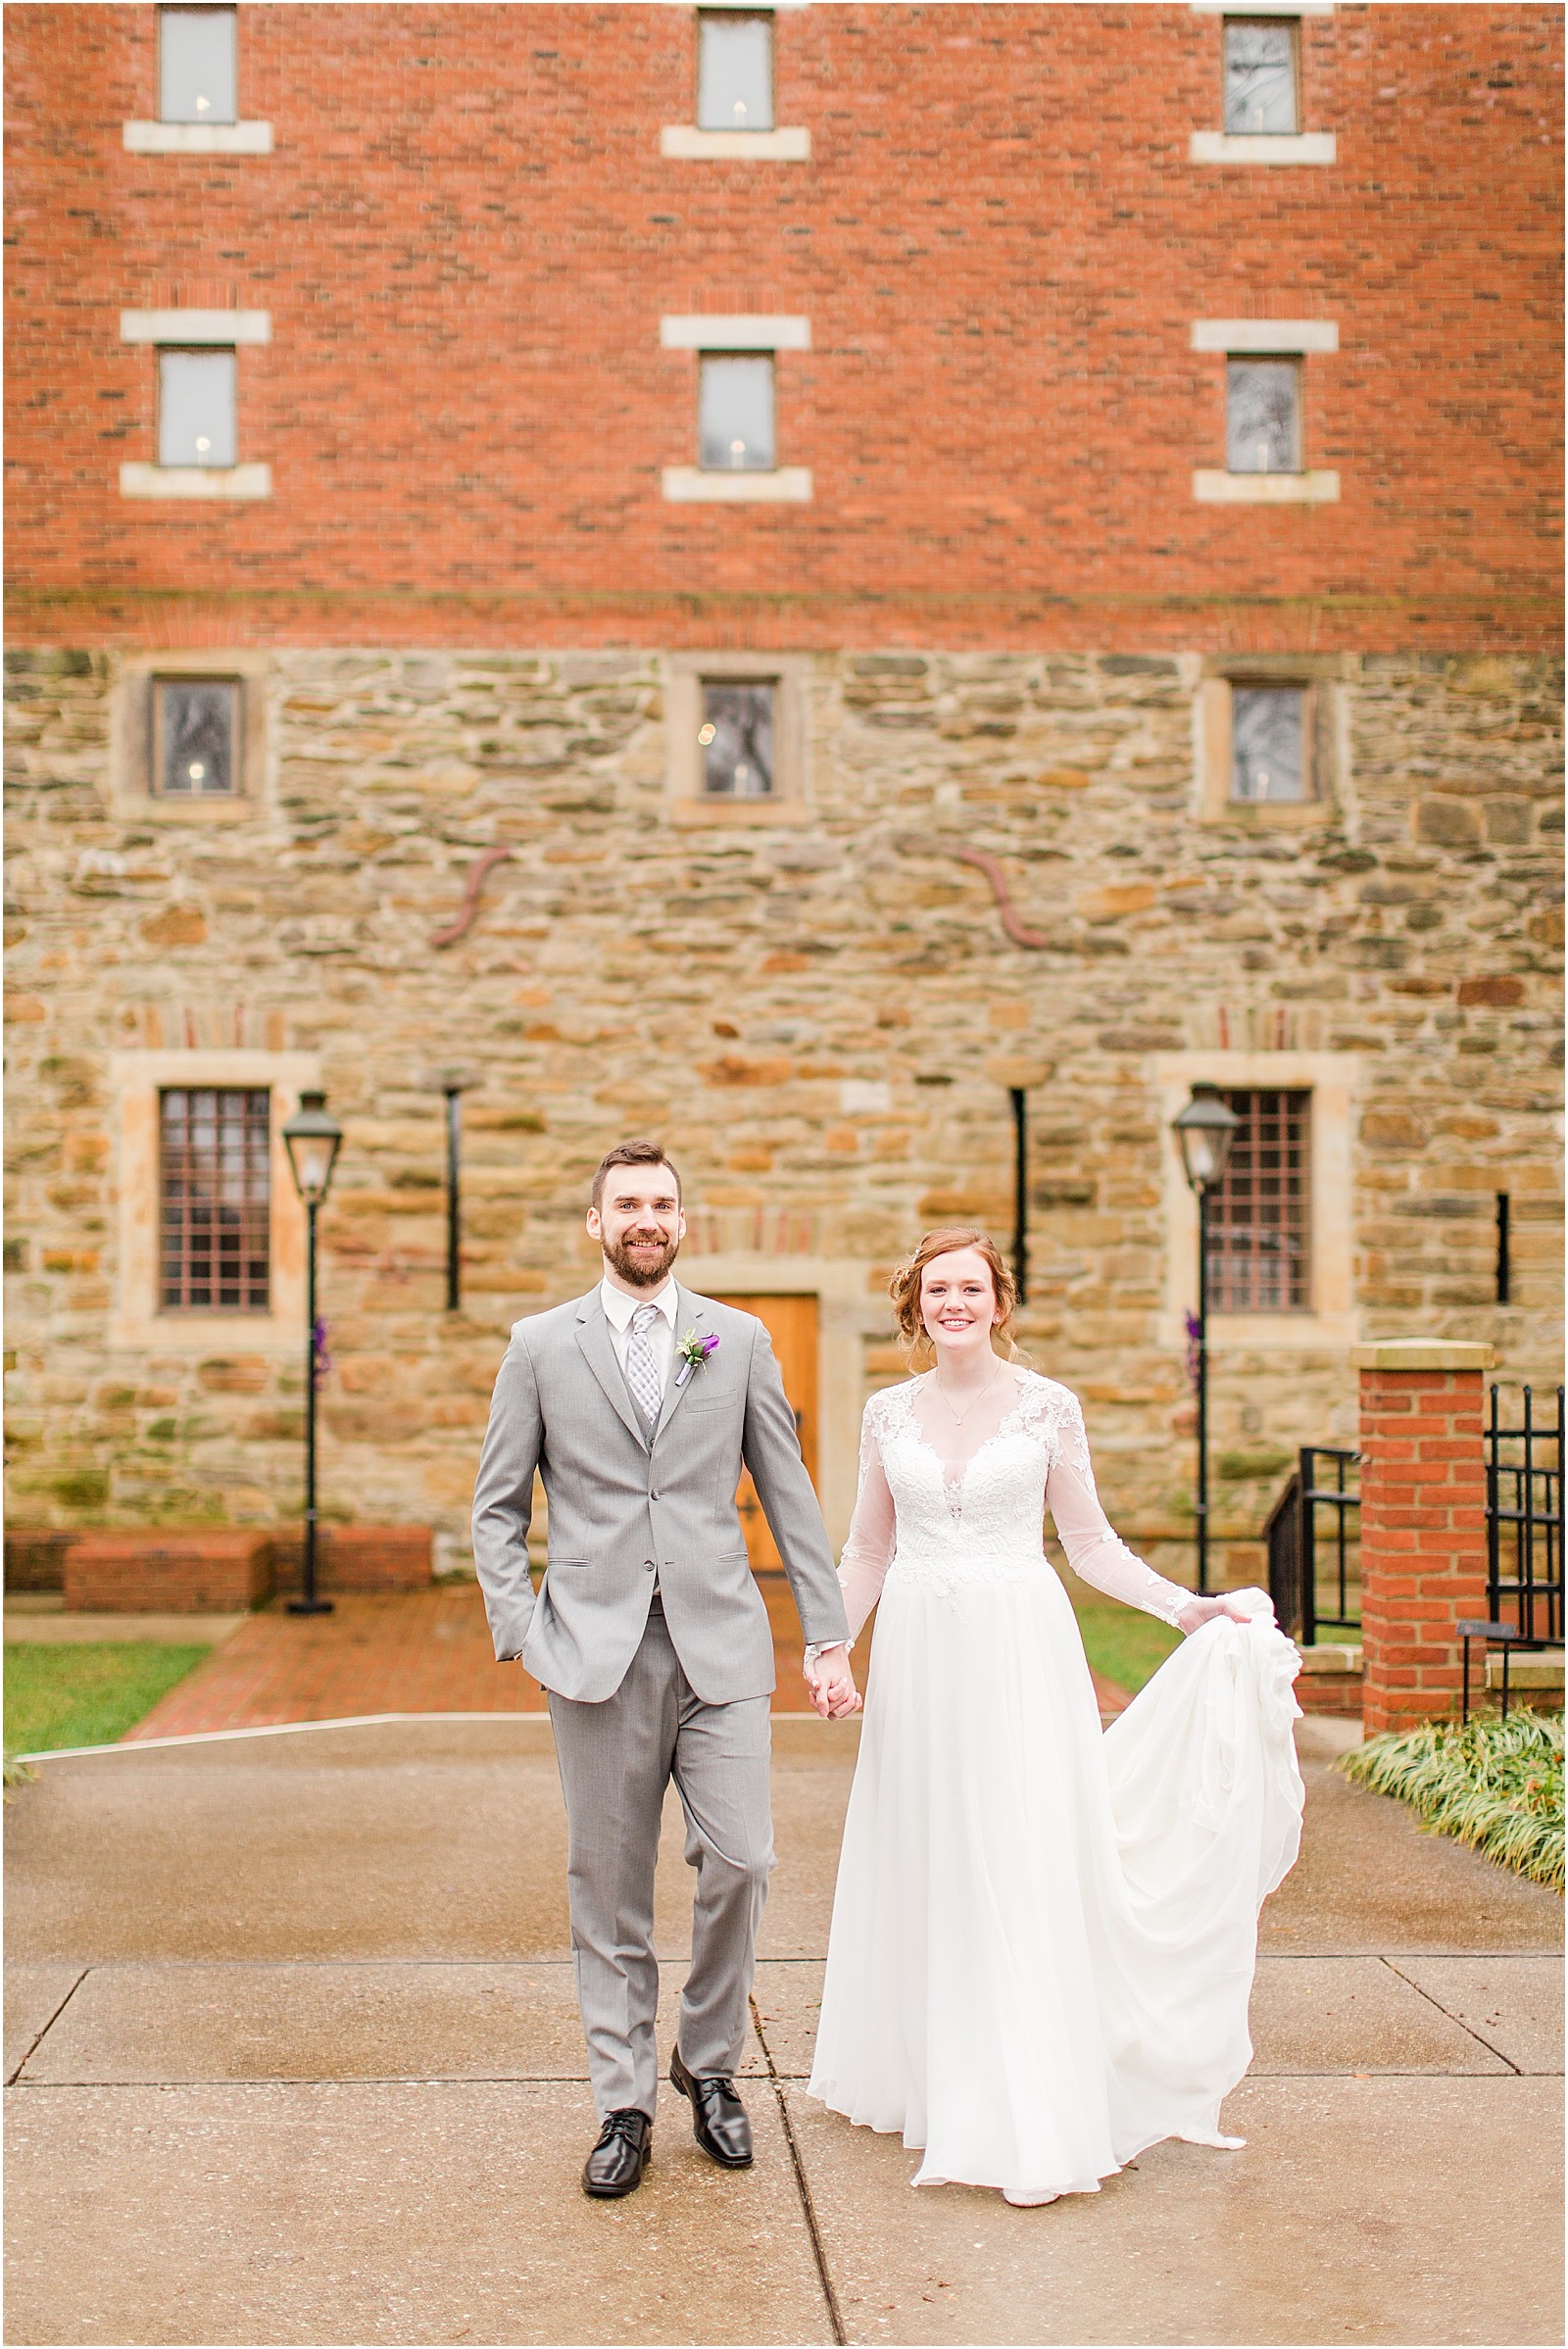 Amy and Logan | A Rainy New Harmony Indiana wedding | Bret and BRandie Photography | Bret and Brandie Photography | 0051.jpg